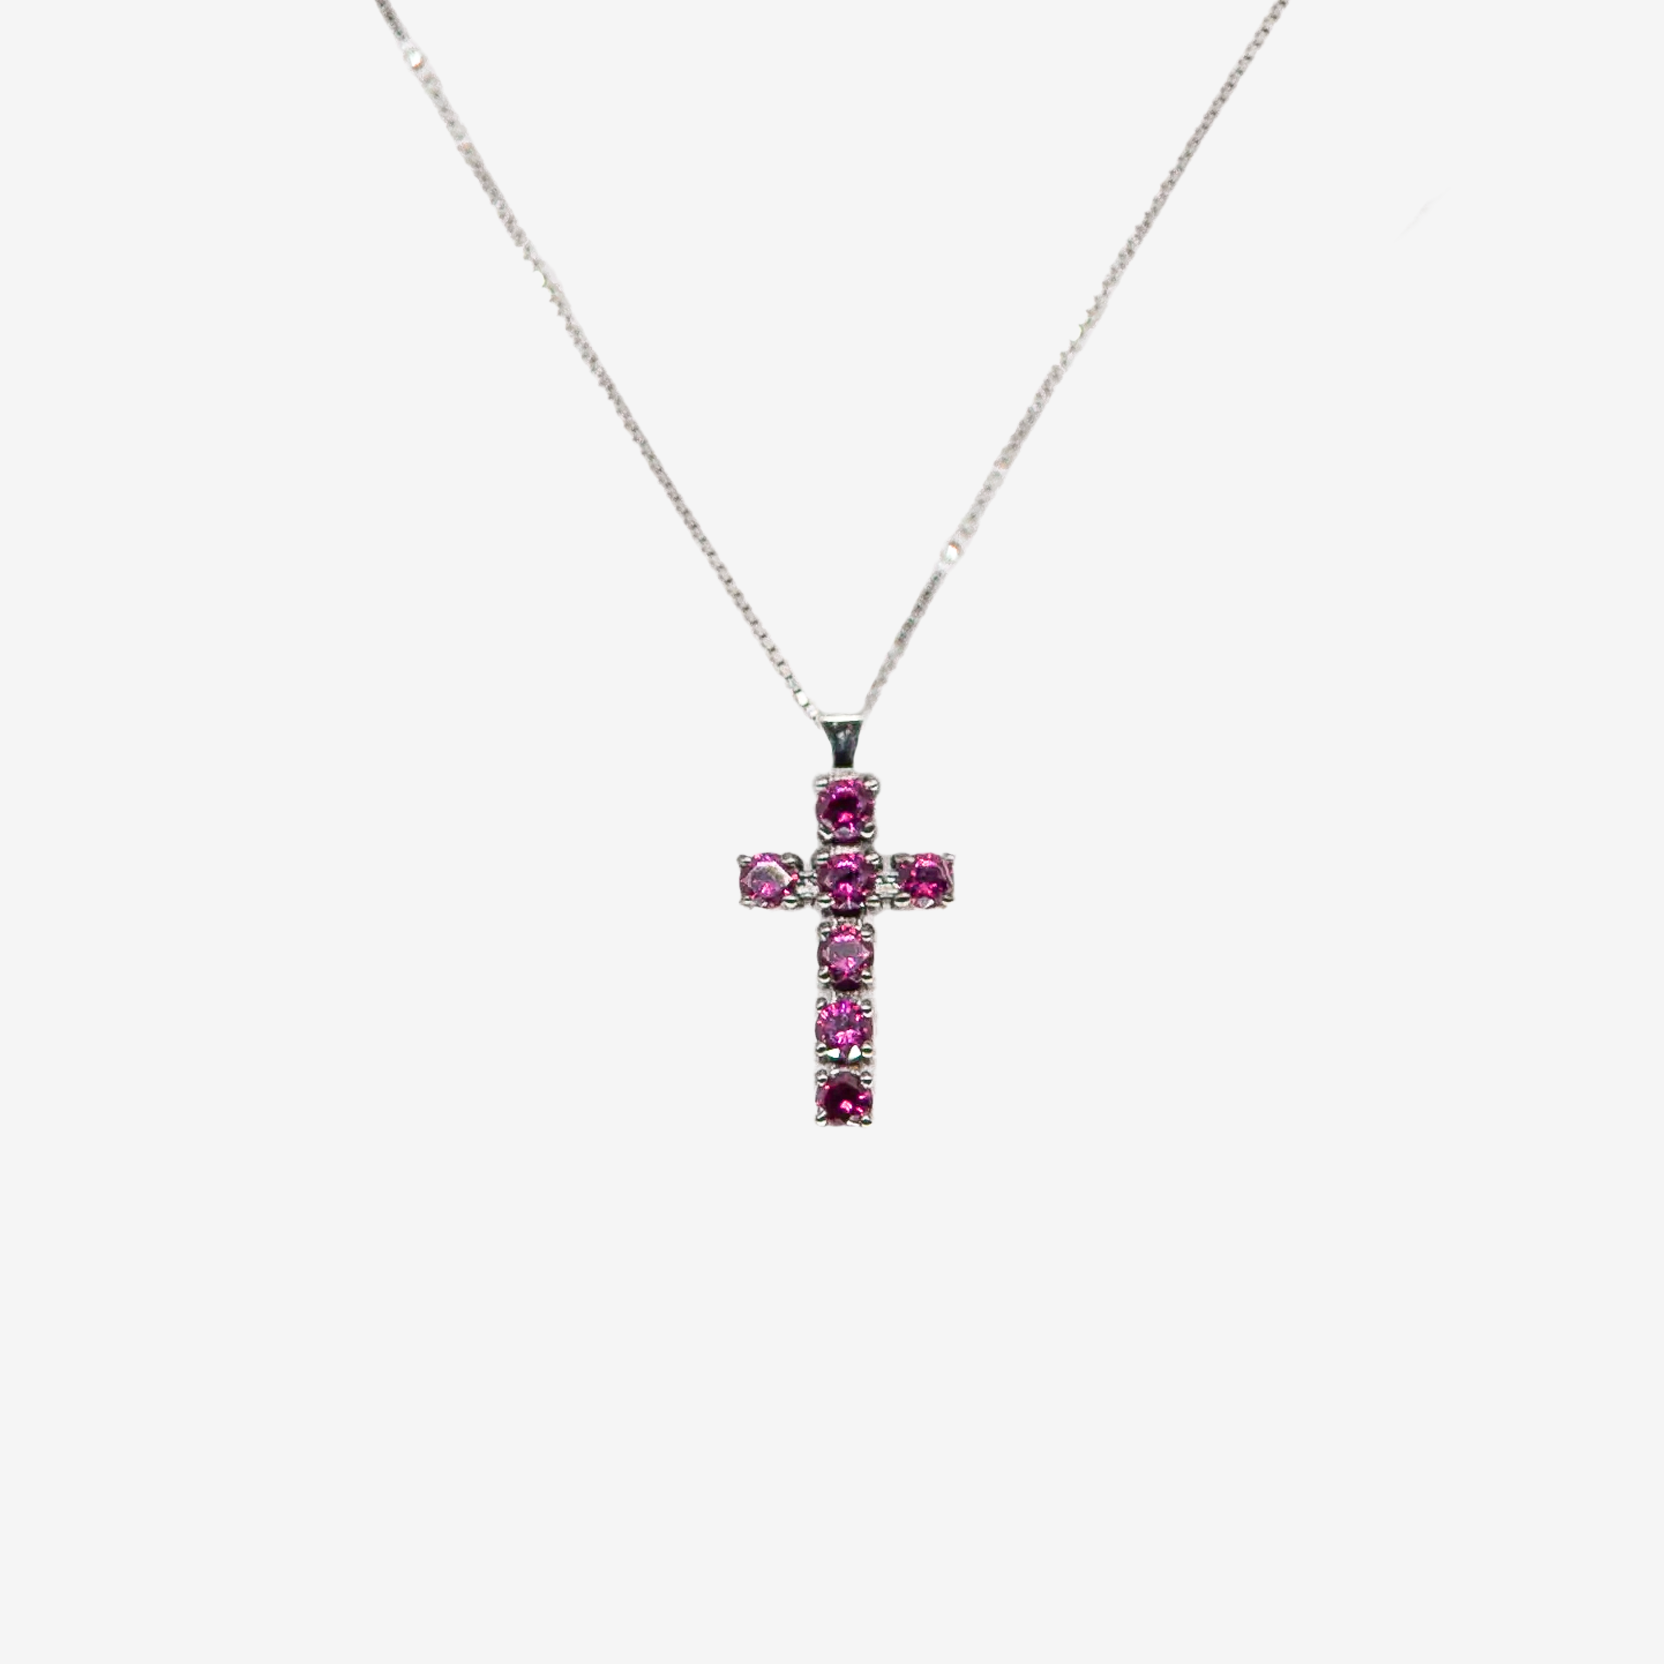 Cross necklace with rubies